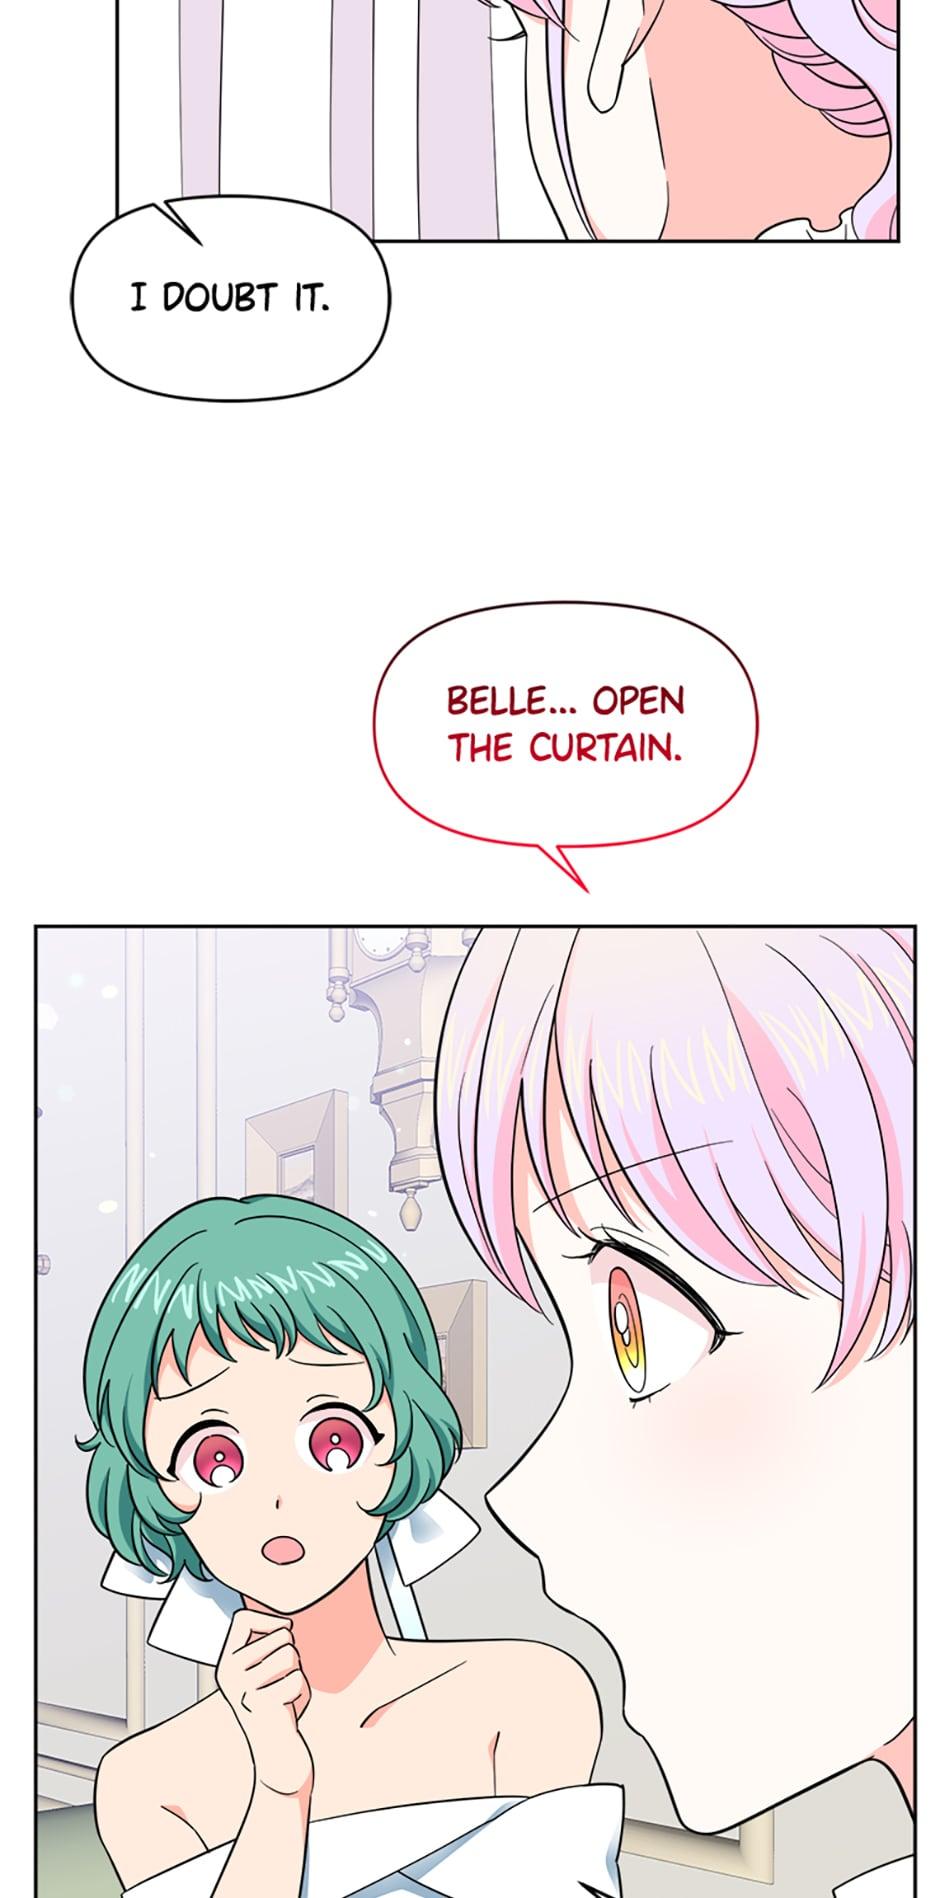 She came back and opened a dessert shop chapter 21